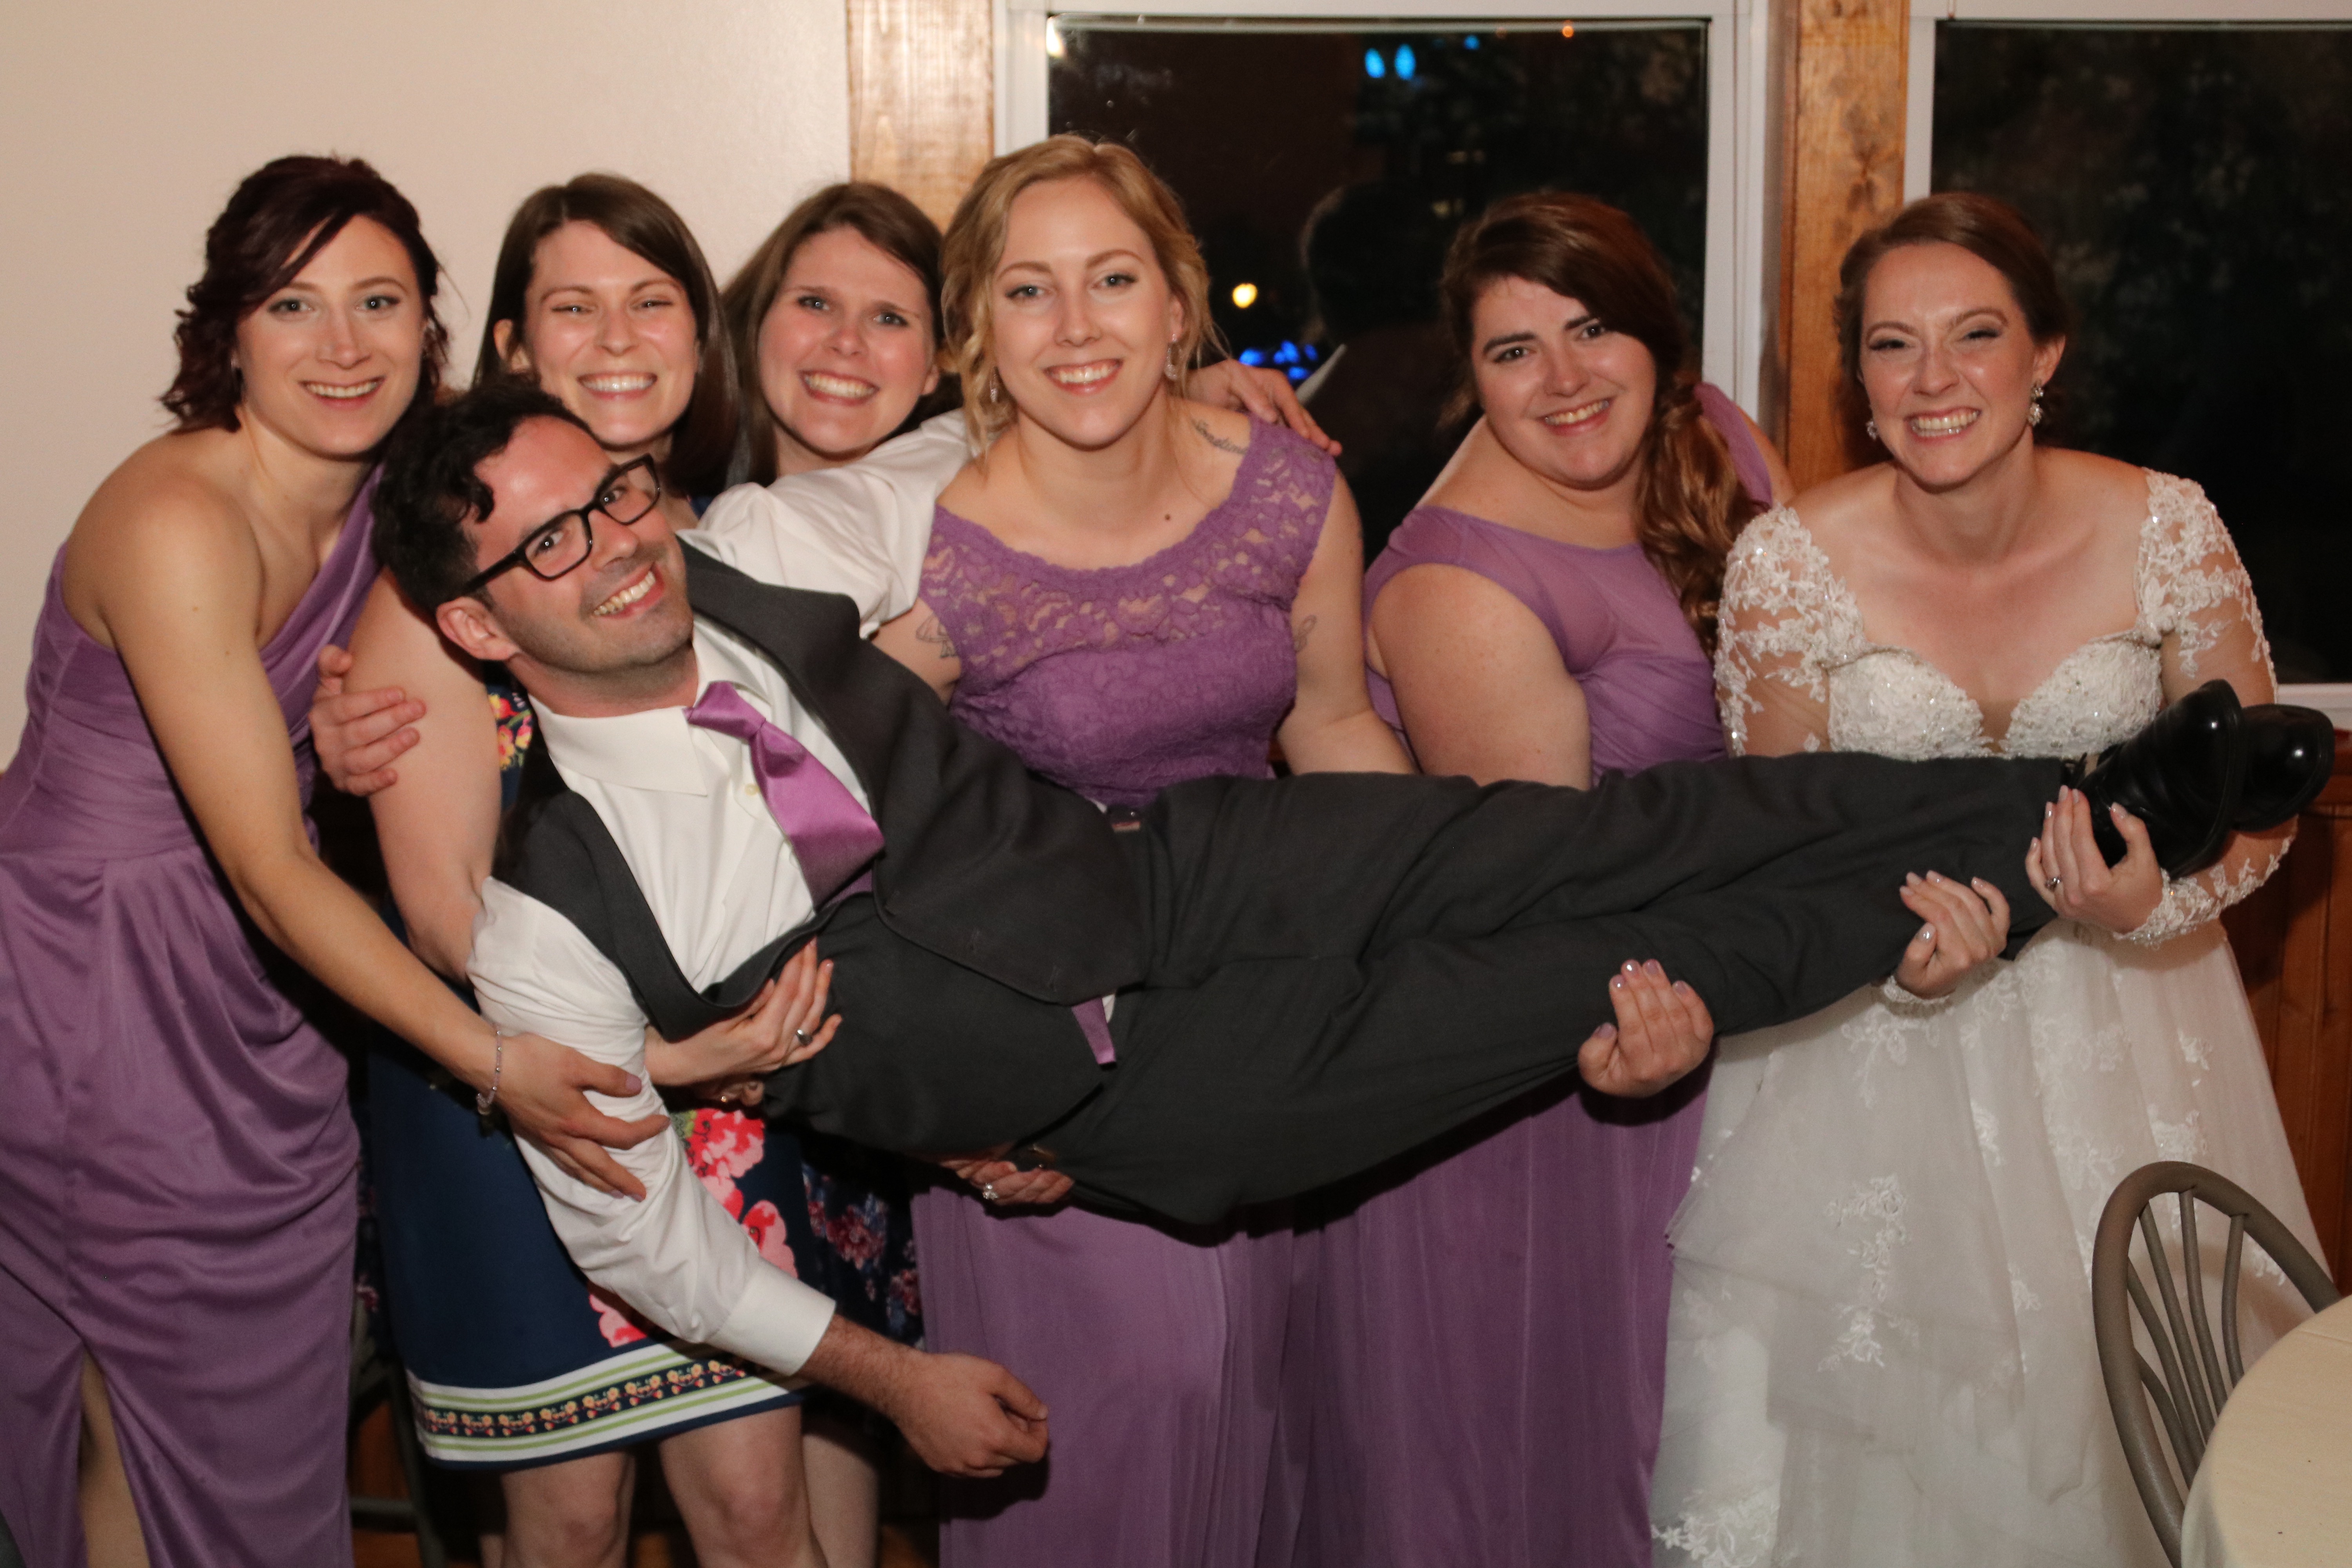 A group of friends are pictured at a wedding